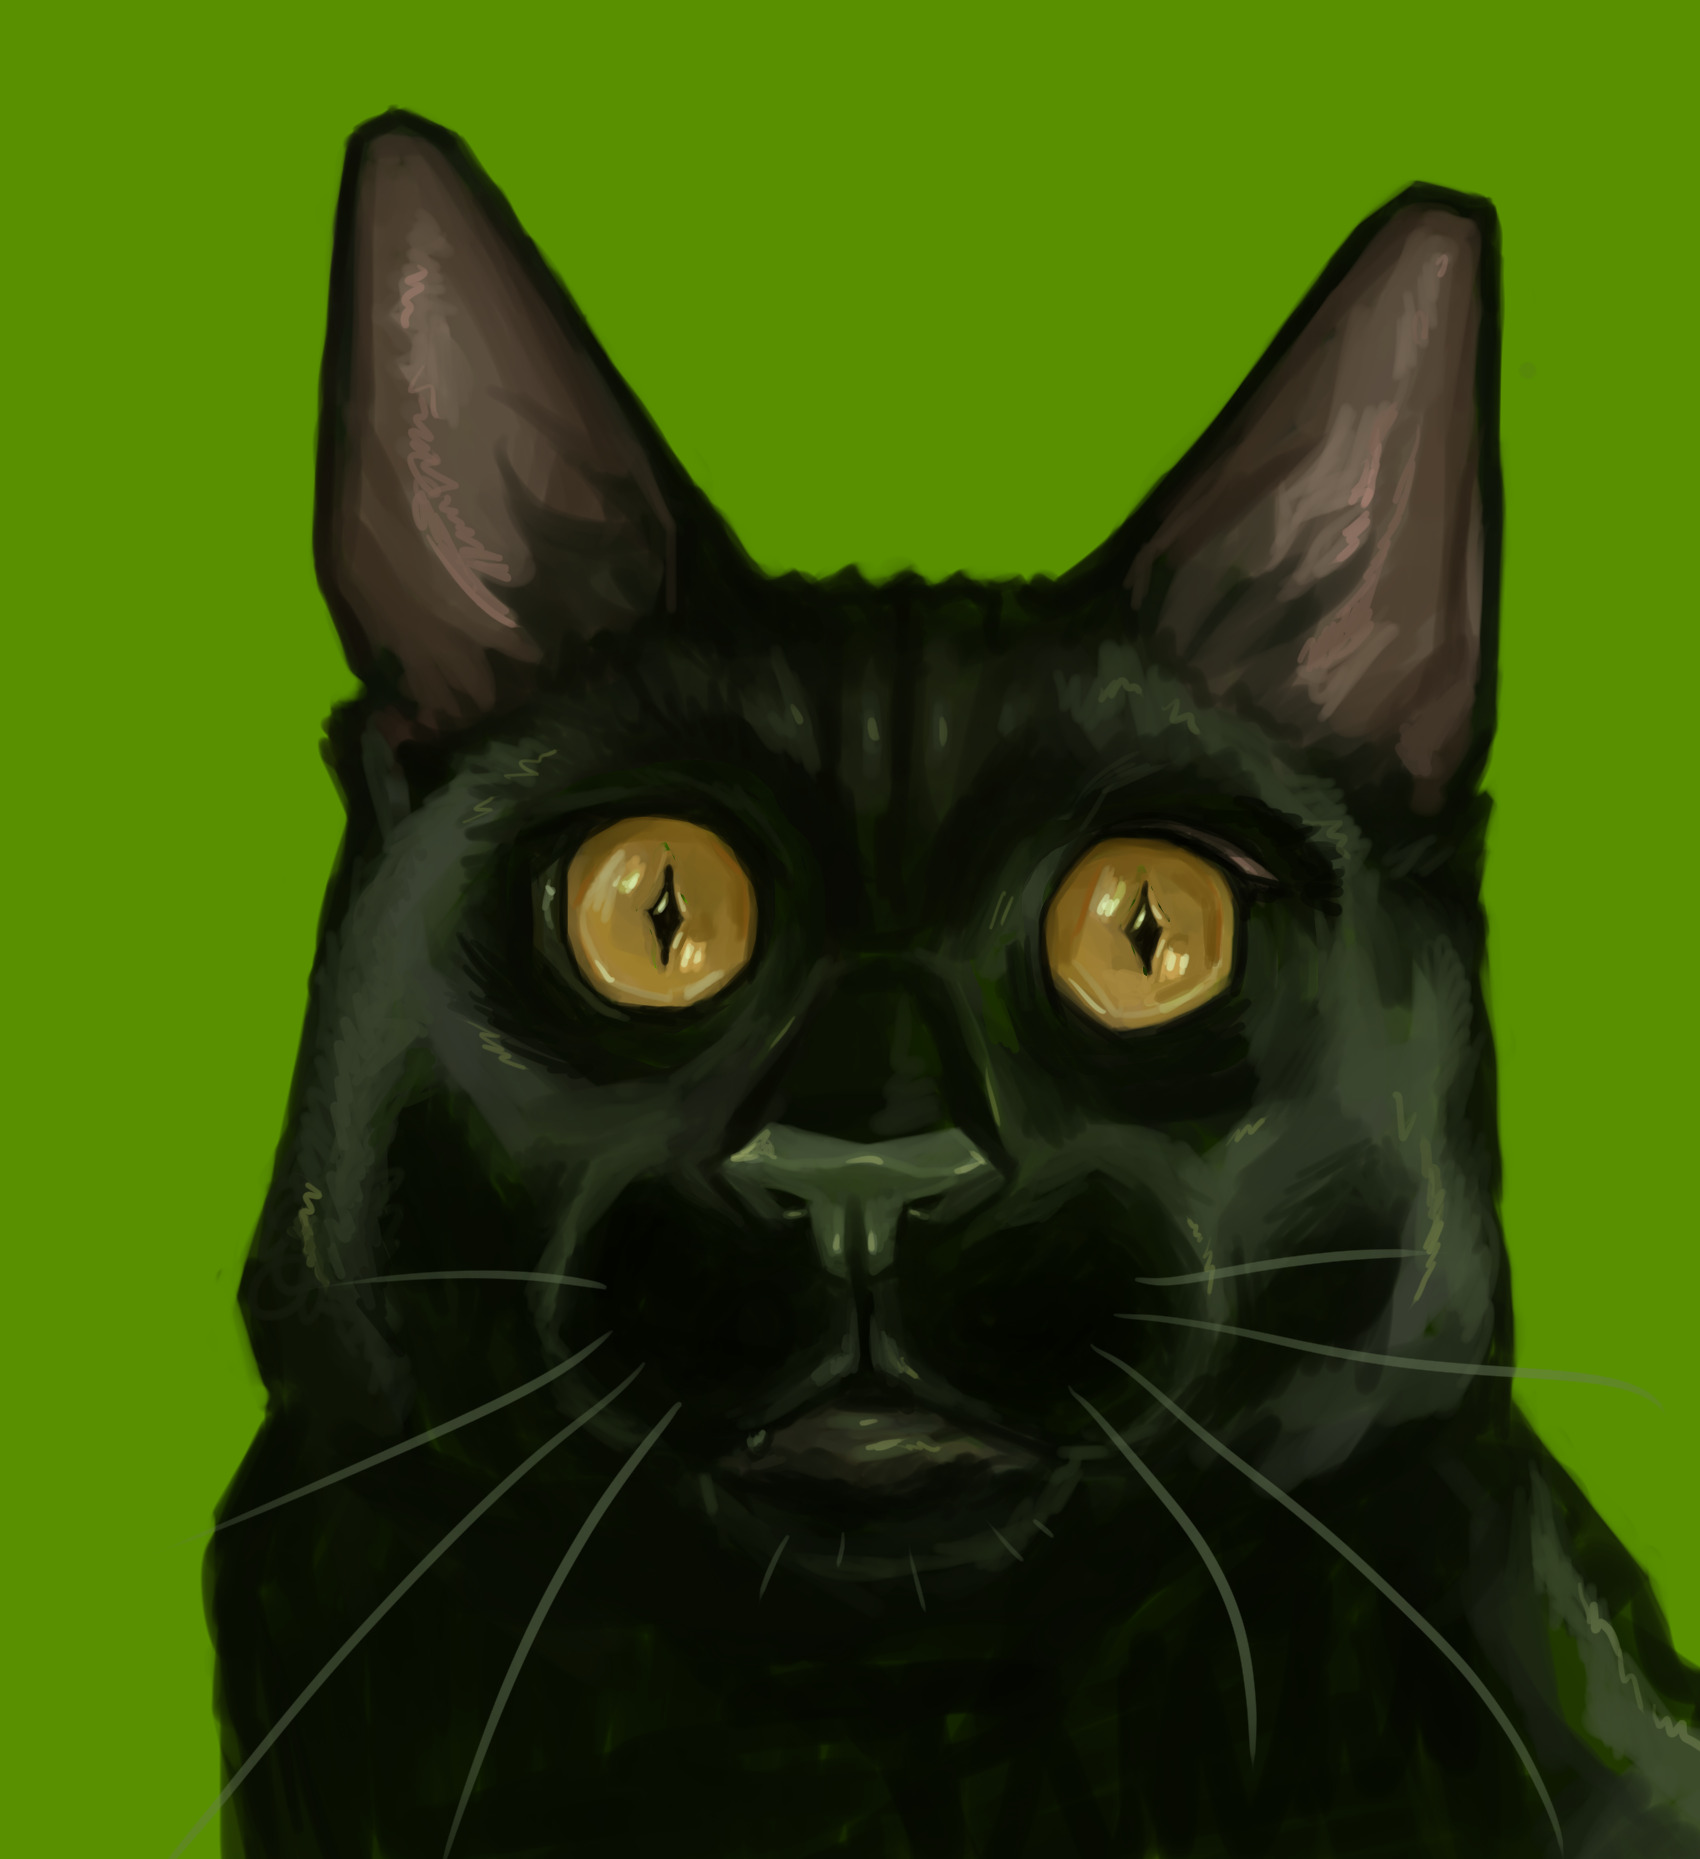 Digital painting of my cat Cowboy on a bright green background close up. He is a black cat with big ears and round eyesand a big snout. His golden eyes are very wide.